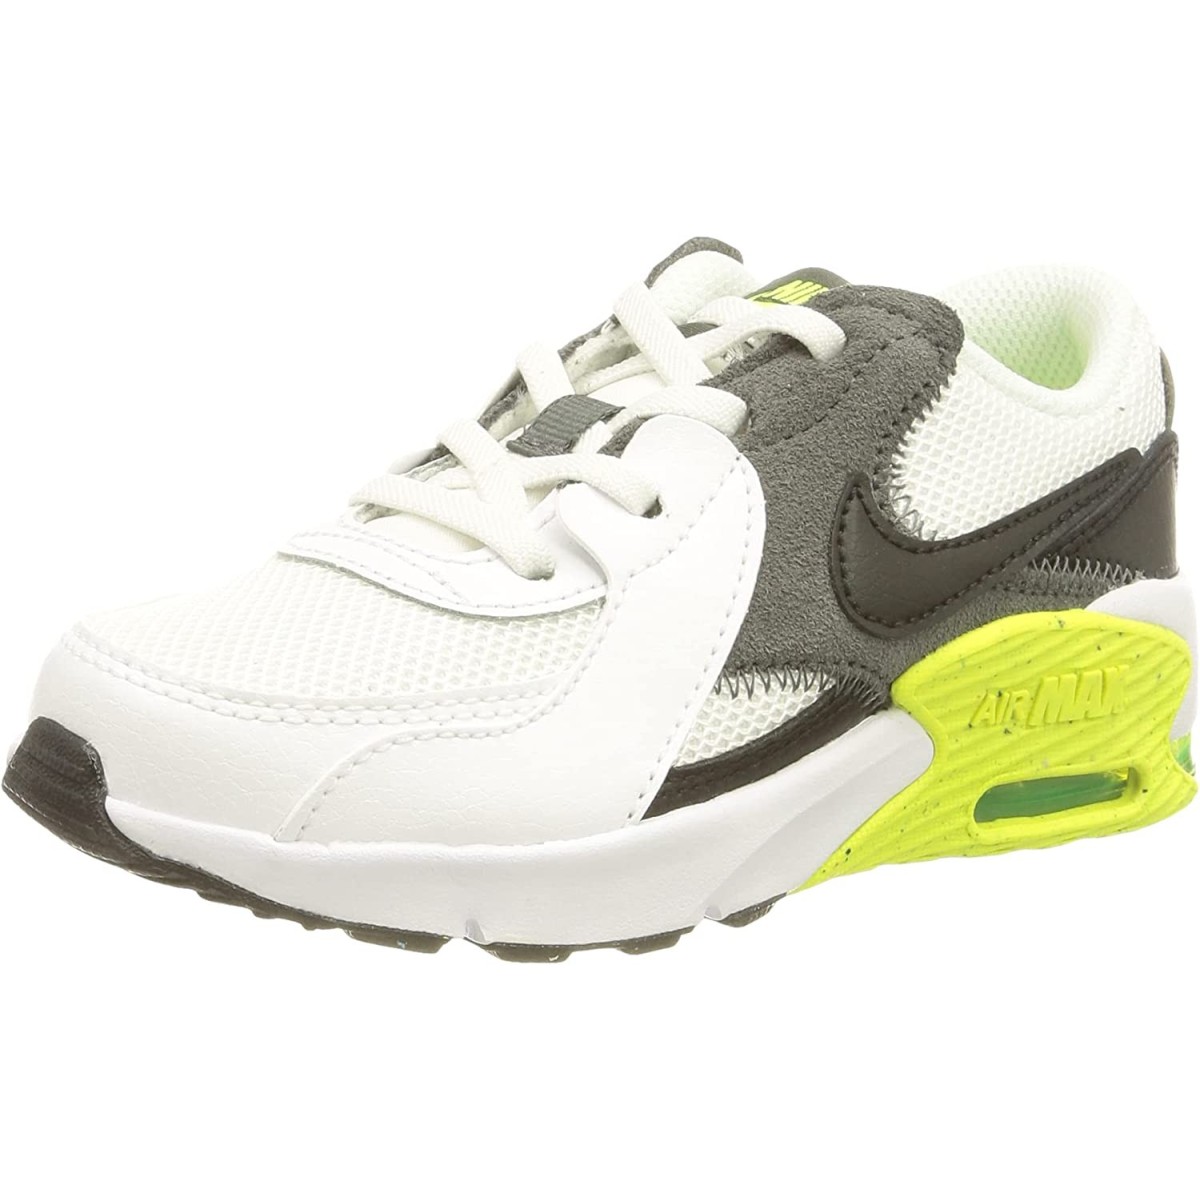 Shoes NIKE AIR MAX EXCEE white/black-iron (PS) 110 grey-volt CD6892